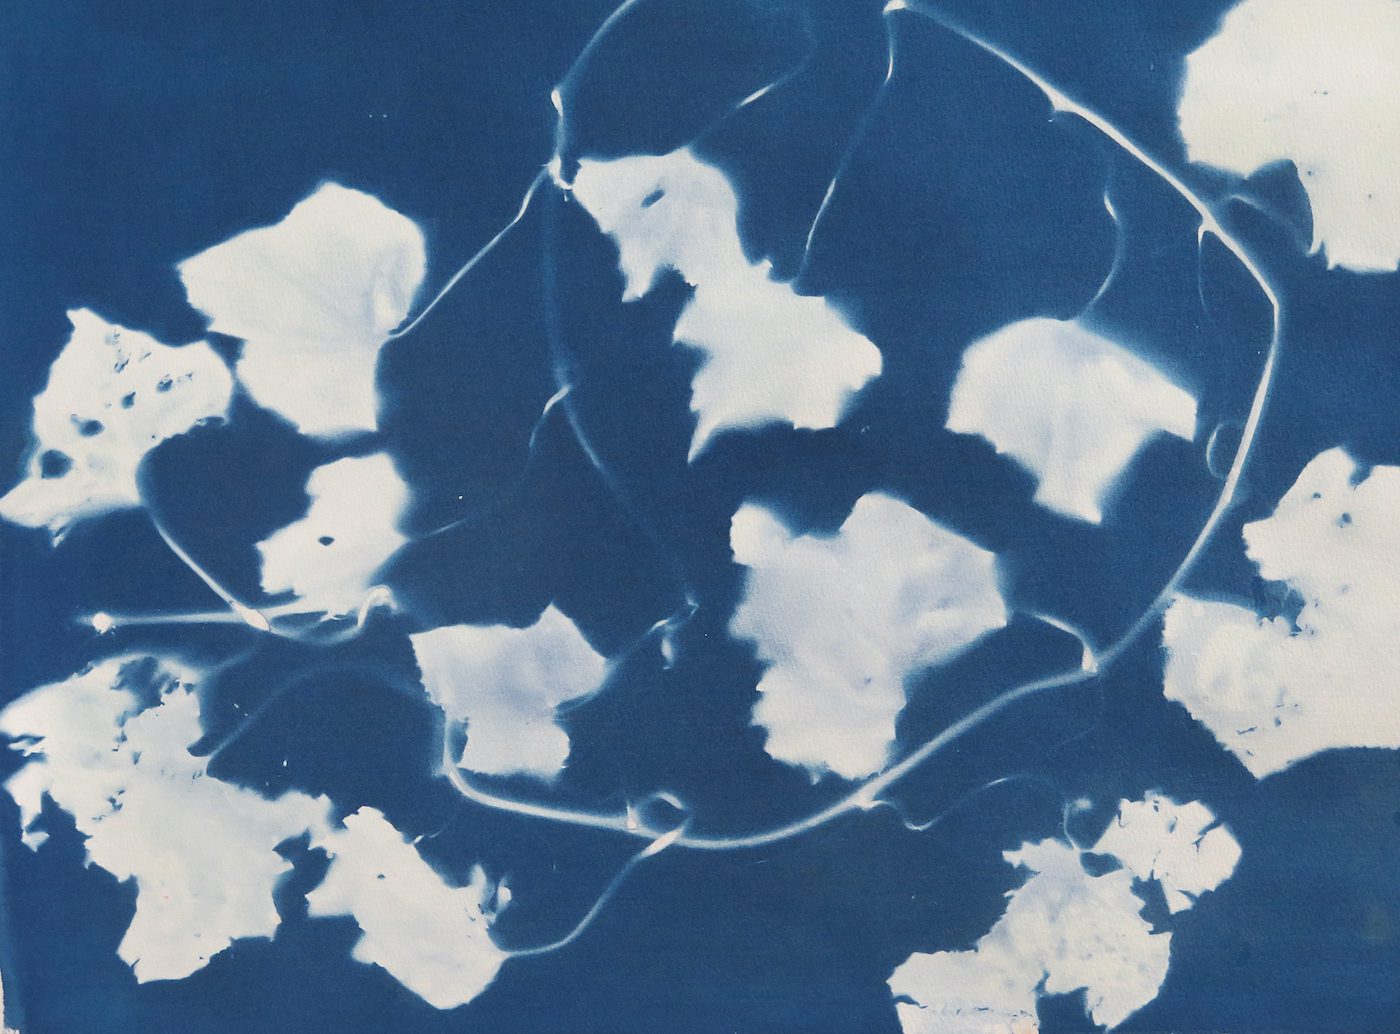 Joy Gregory, Invisible Life Force of Plants, cyanotype and lumen prints, 2020. Image courtesy of the artist.